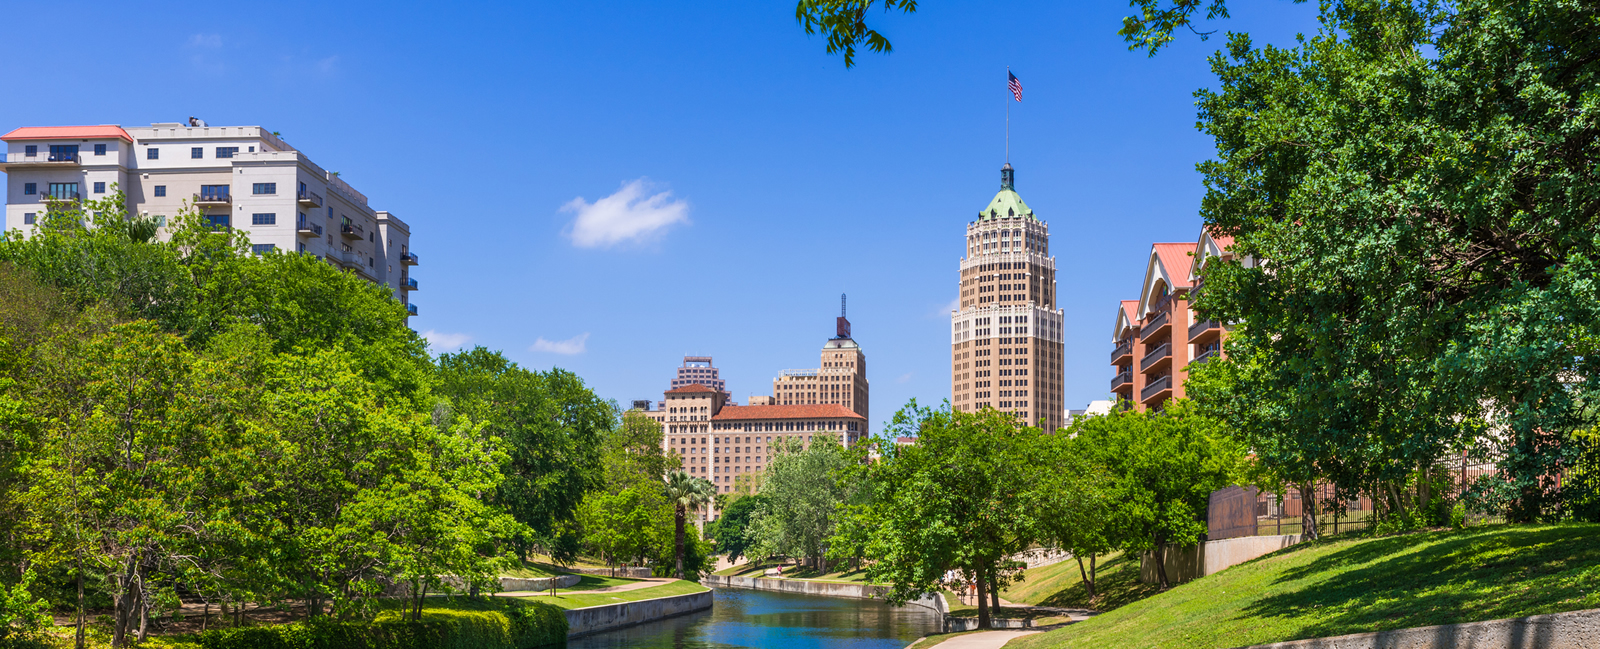 The San Antonio skyline highlights the potential for real estate and economic development in the Texas market